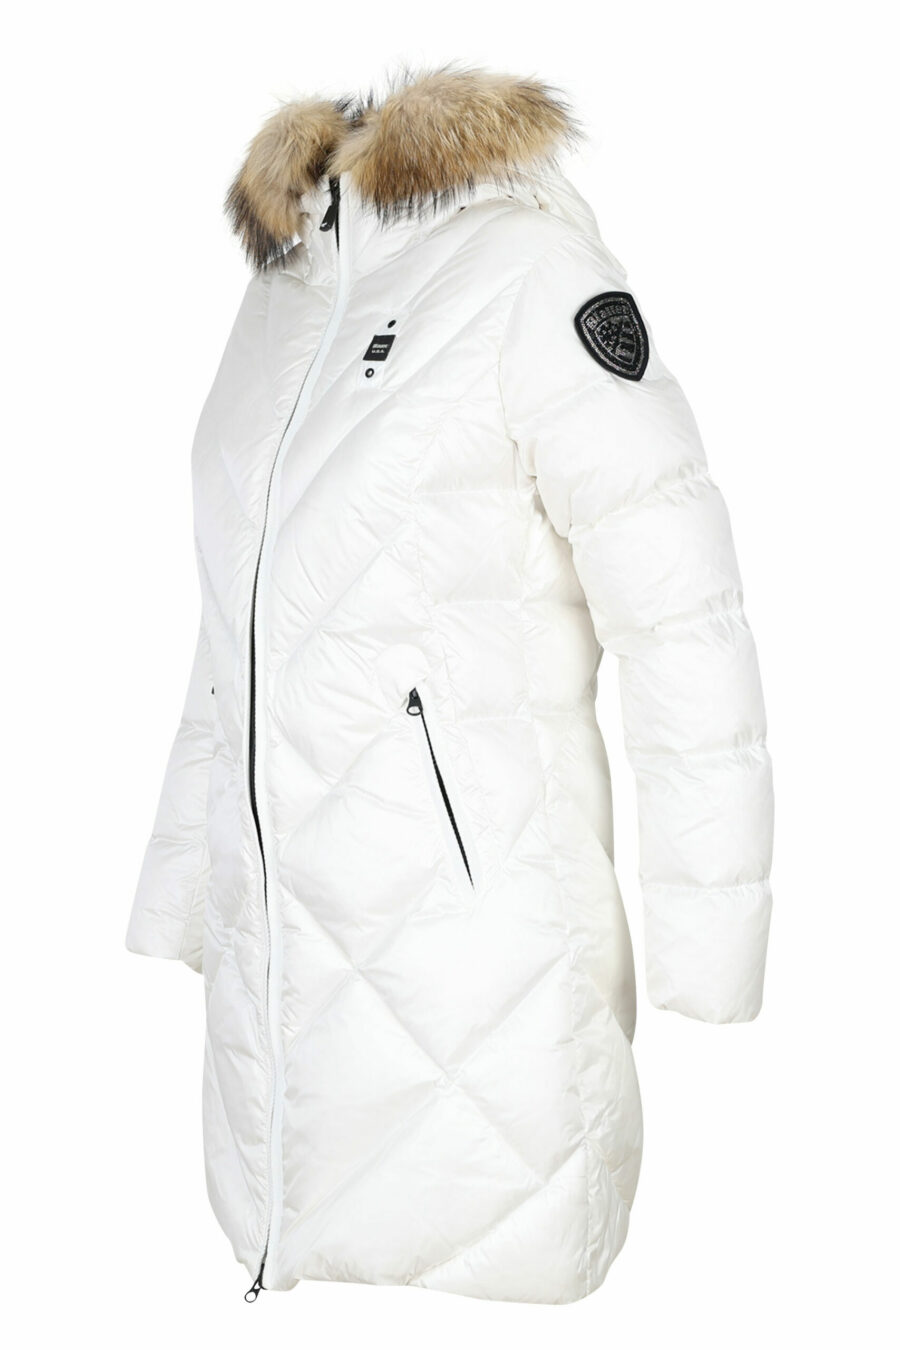 White waterproof hooded jacket with fur hood and diagonal lines with beige lining - 8058610650896 2 scaled